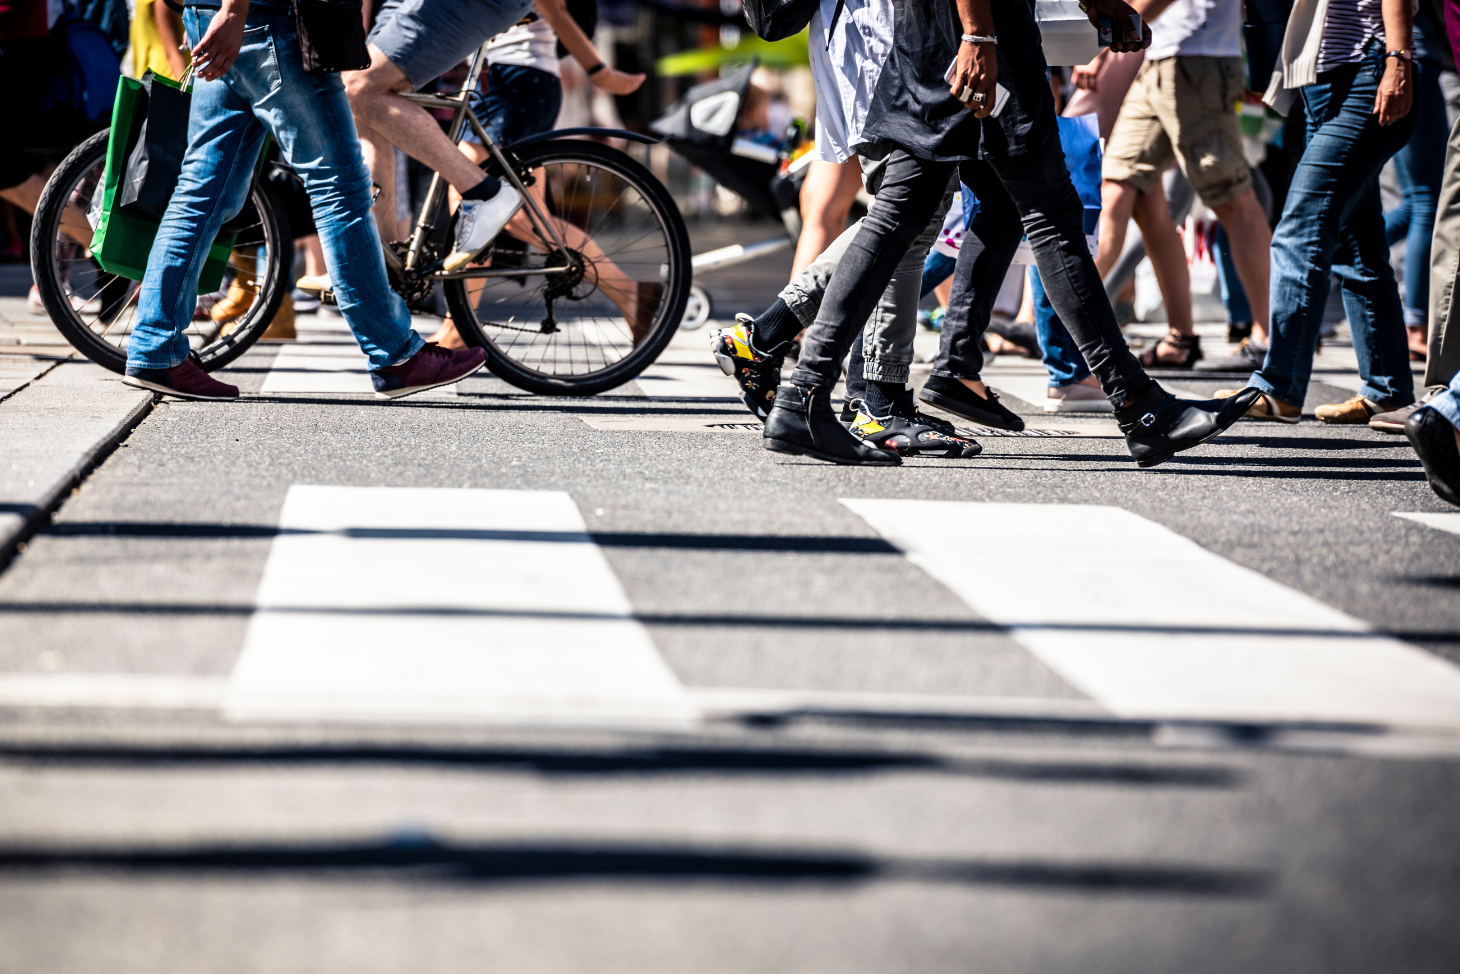 Pedestrian Traffic Fatalities by State: 2021 Preliminary Data